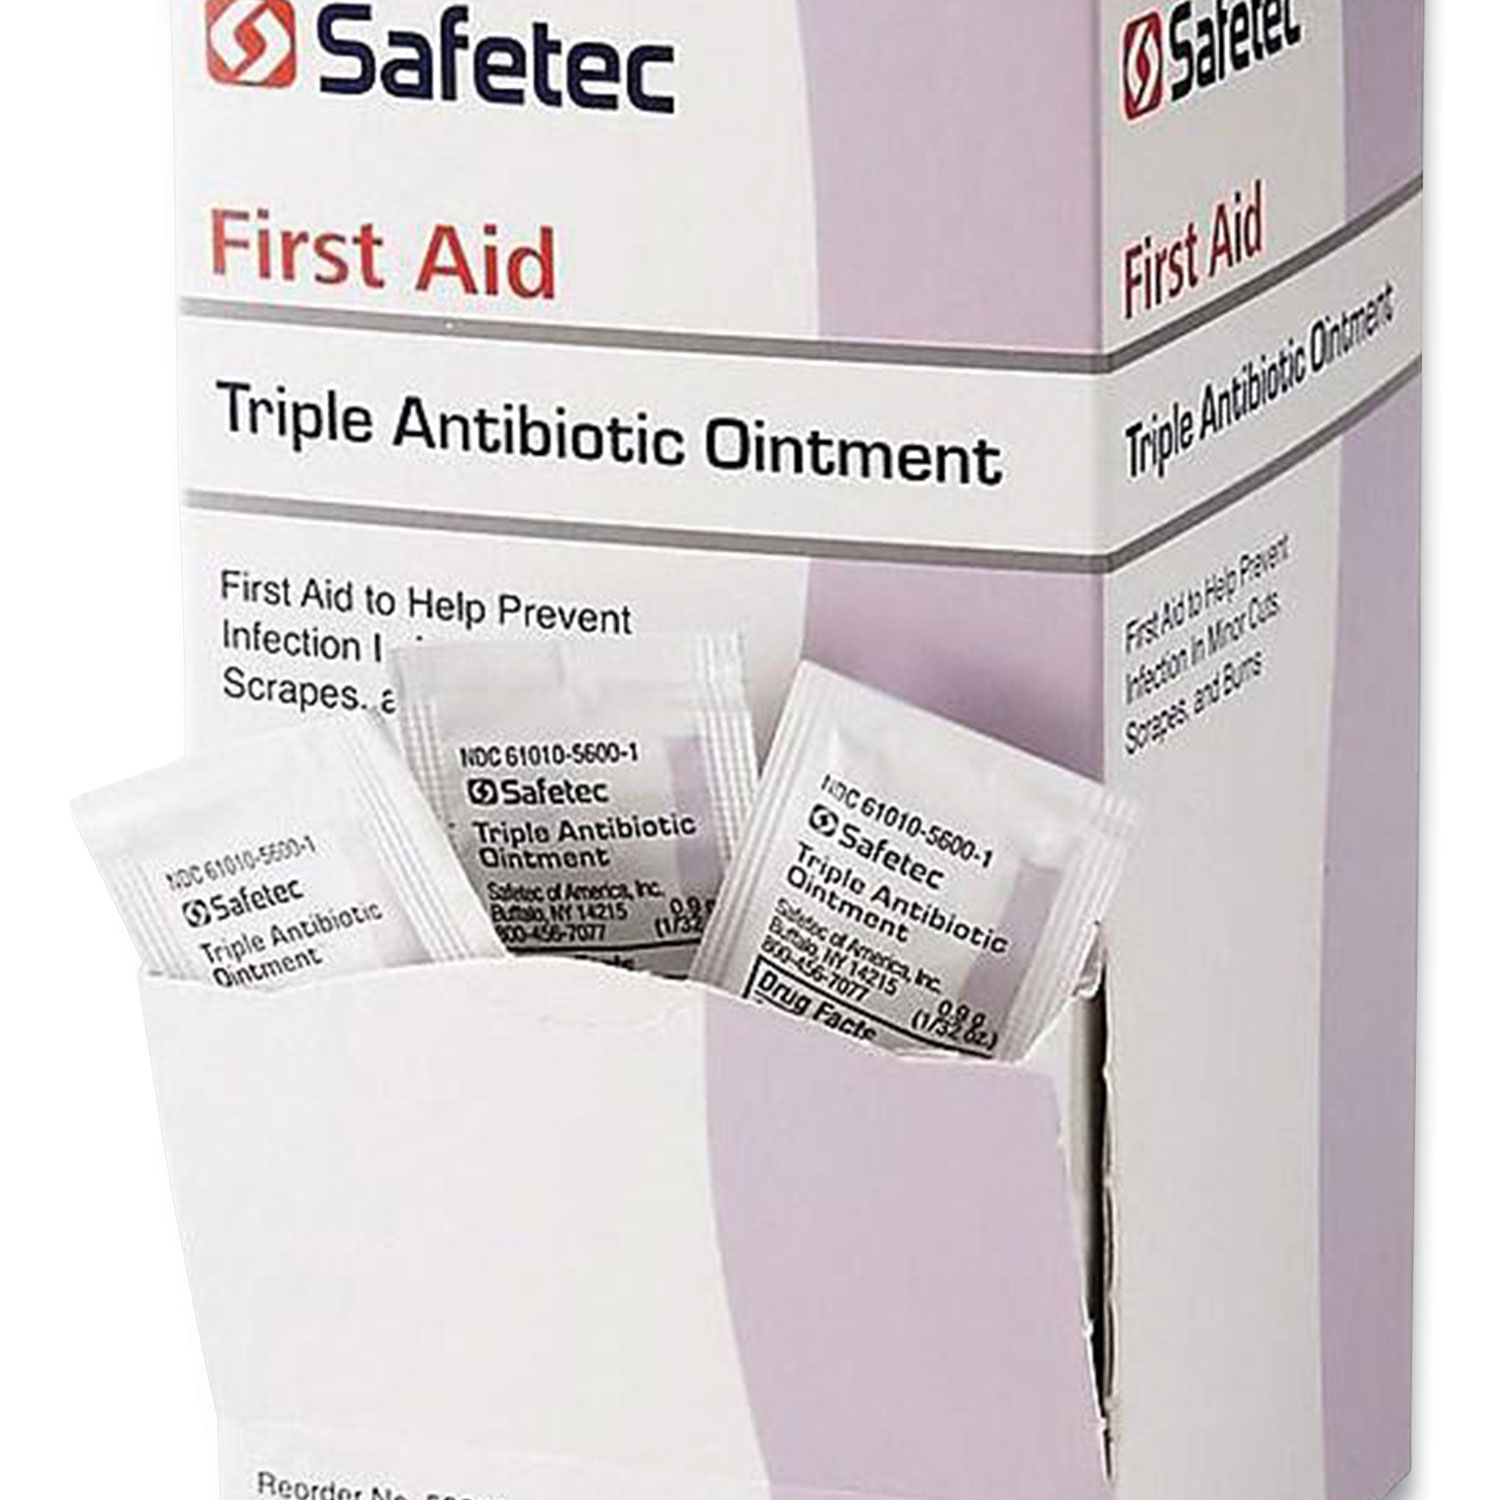 Safetec® First Aid Triple Antibiotic Ointment, 0.03 oz Packet, 144/Box